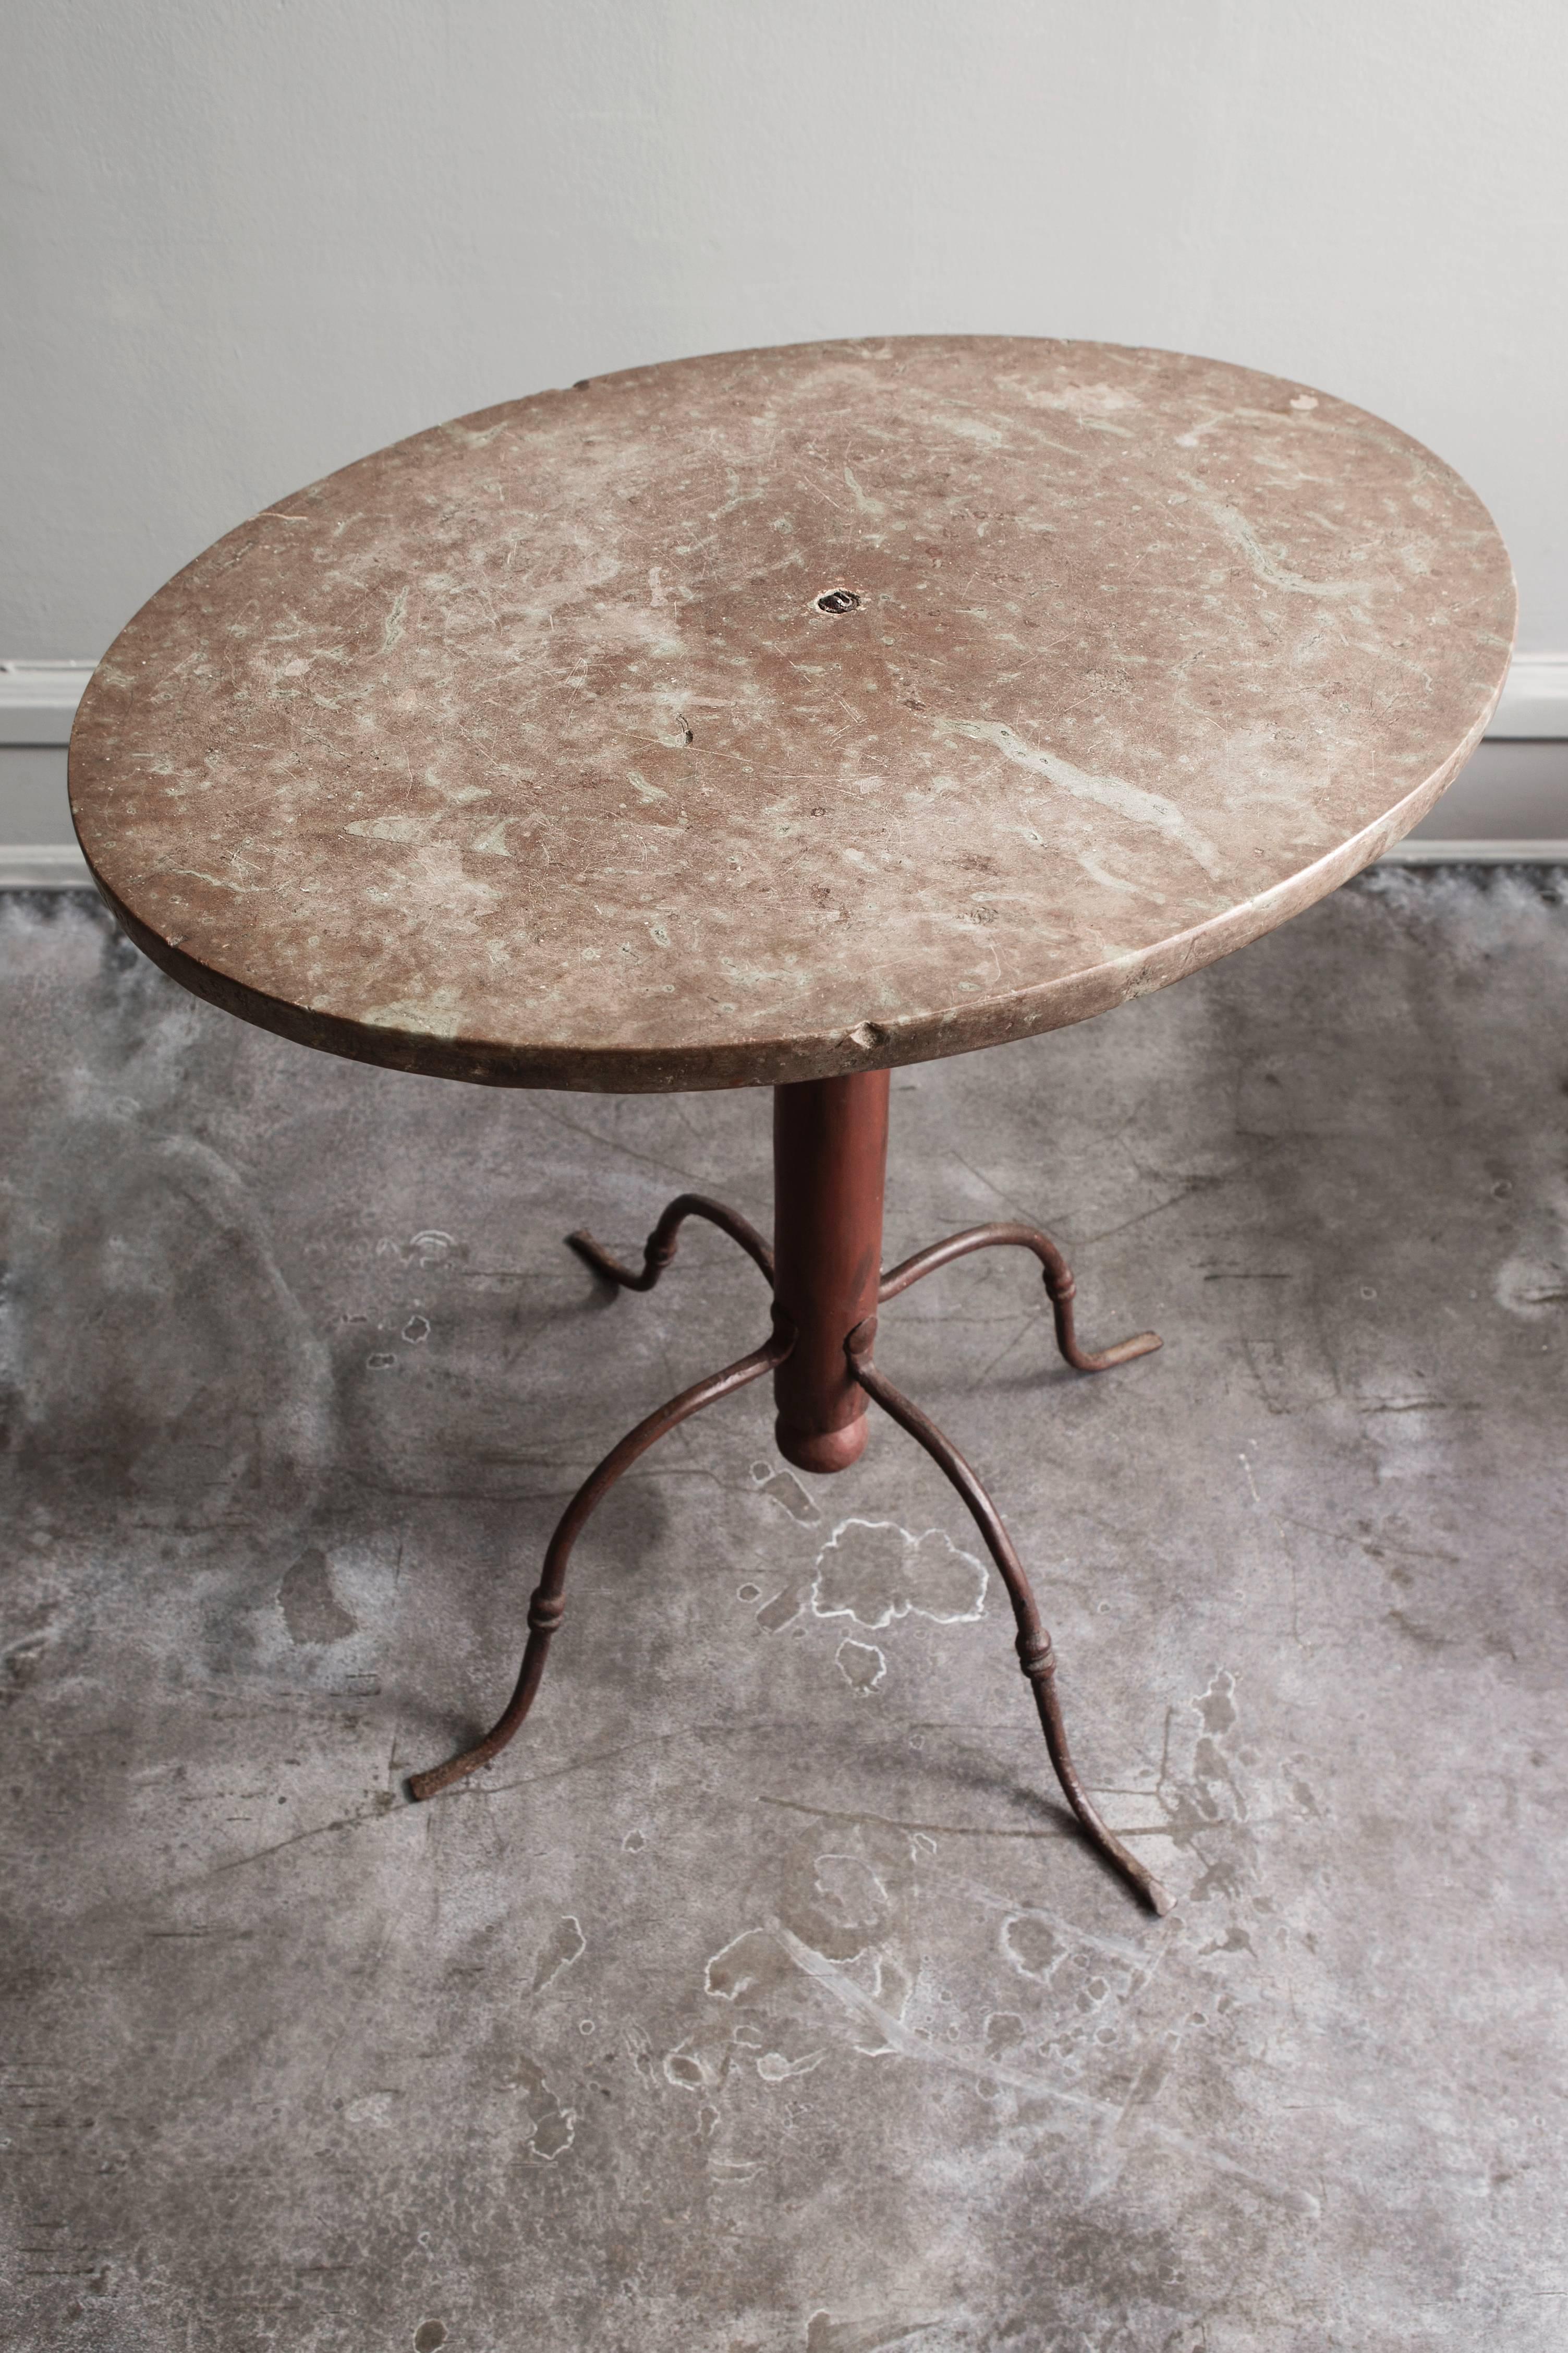 Very rare and exquisite Swedish side table. Tabletop made of Öland stone, stem made of painted wood with attached metal legs.
Please note - this item will be shipped from our New York City studio.